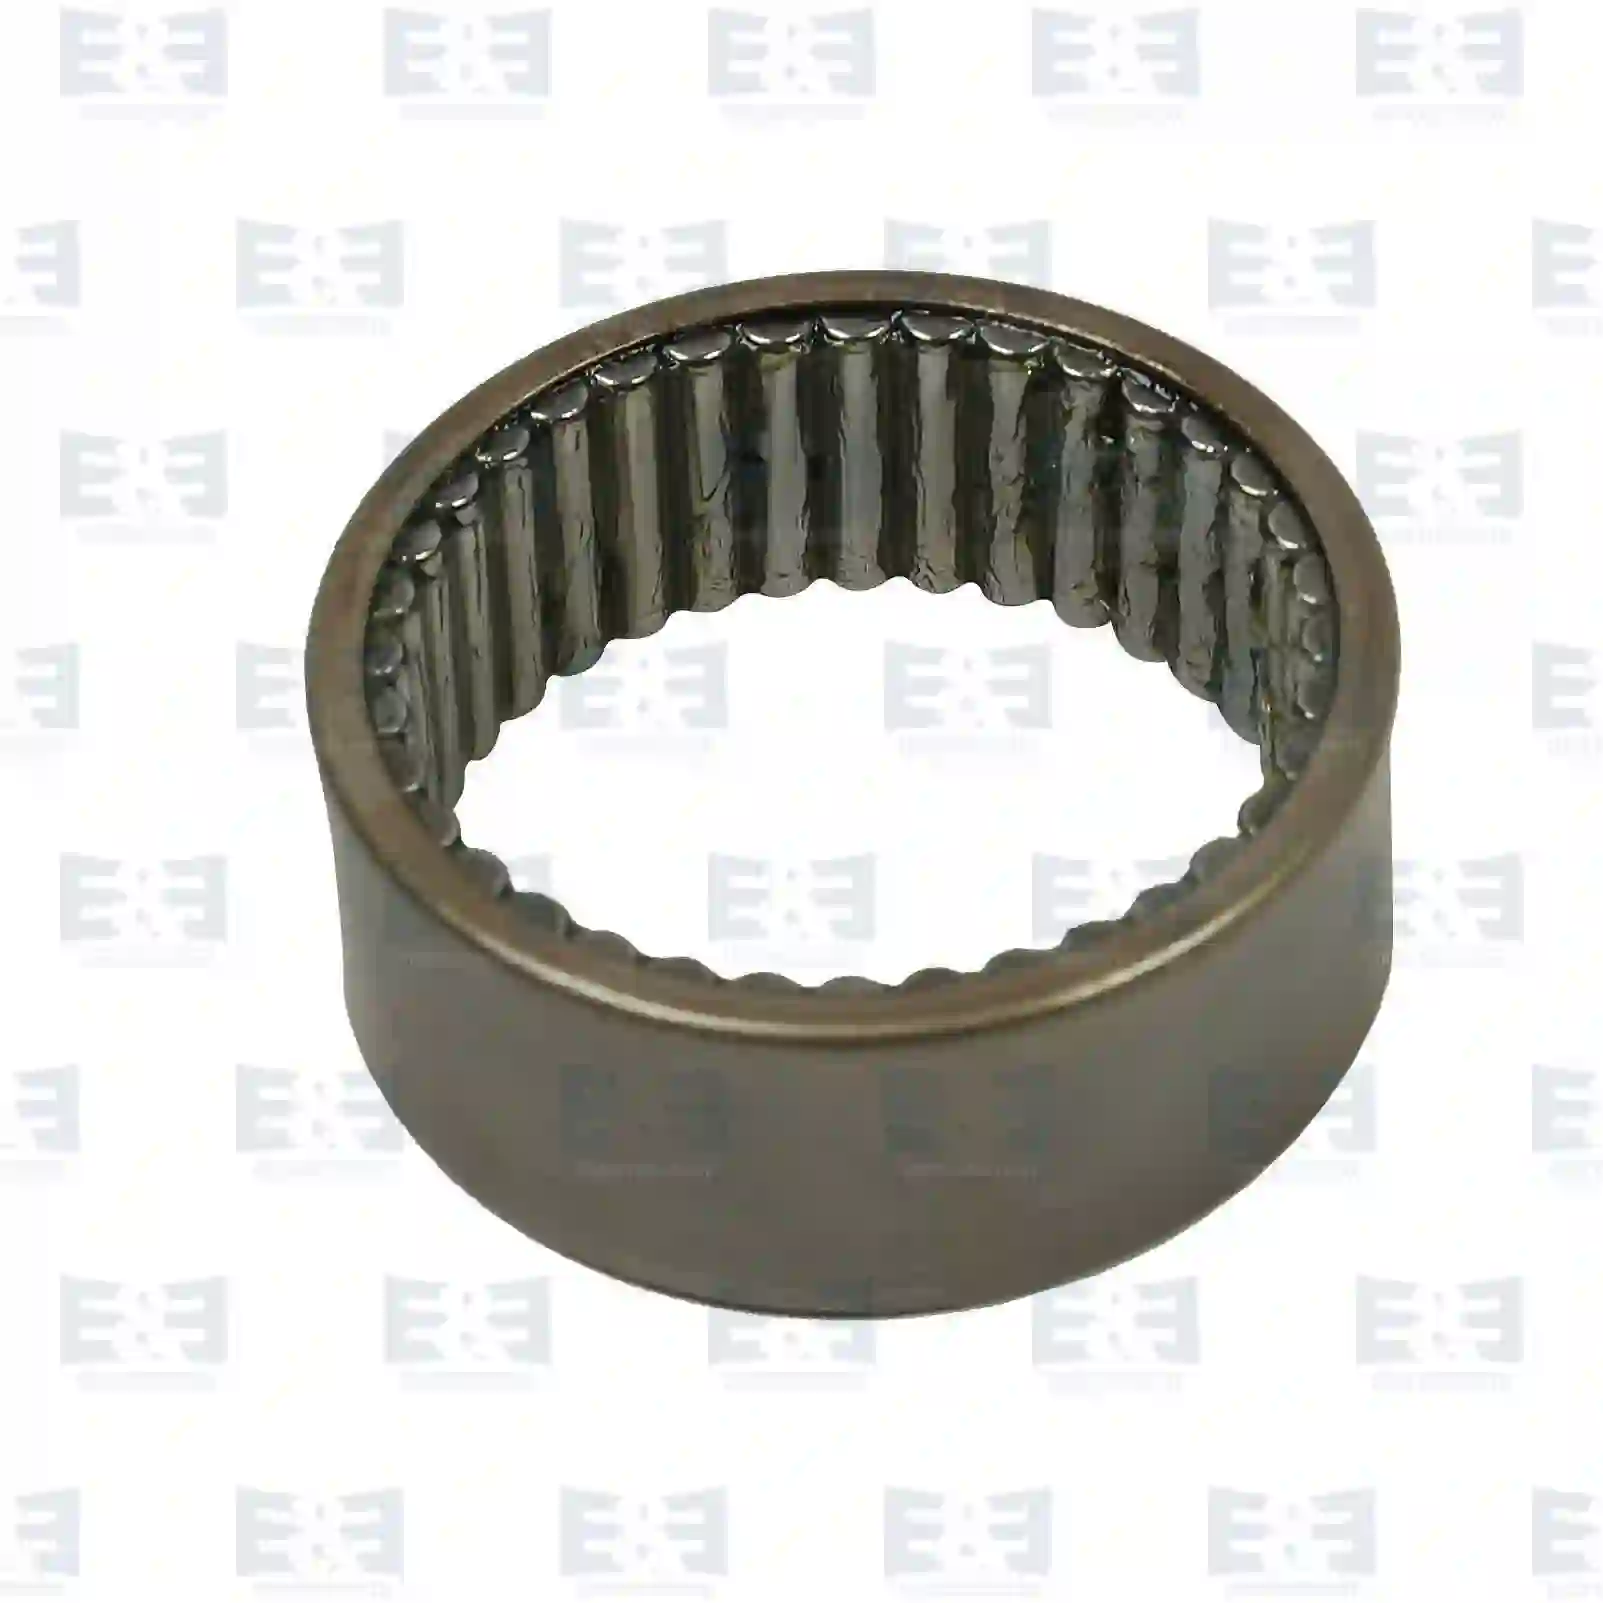 Gearbox Unit Needle bearing, EE No 2E2279419 ,  oem no:06337190057, 06337190058, 06337190061, 81934046005, 2V5607307 E&E Truck Spare Parts | Truck Spare Parts, Auotomotive Spare Parts